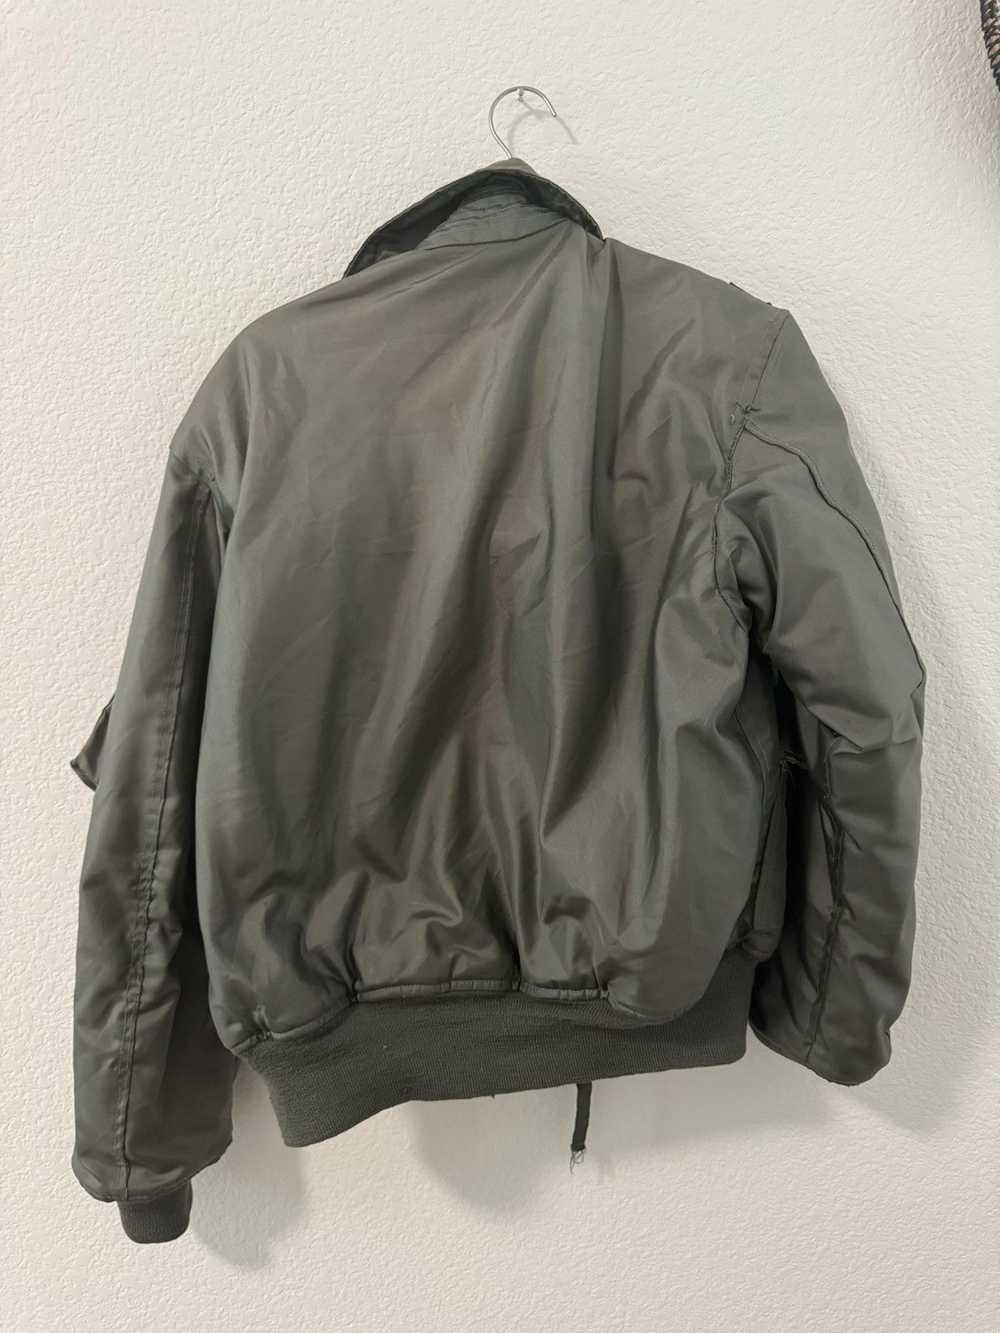 Vintage Vintage bomber jacket from the 50s - image 4